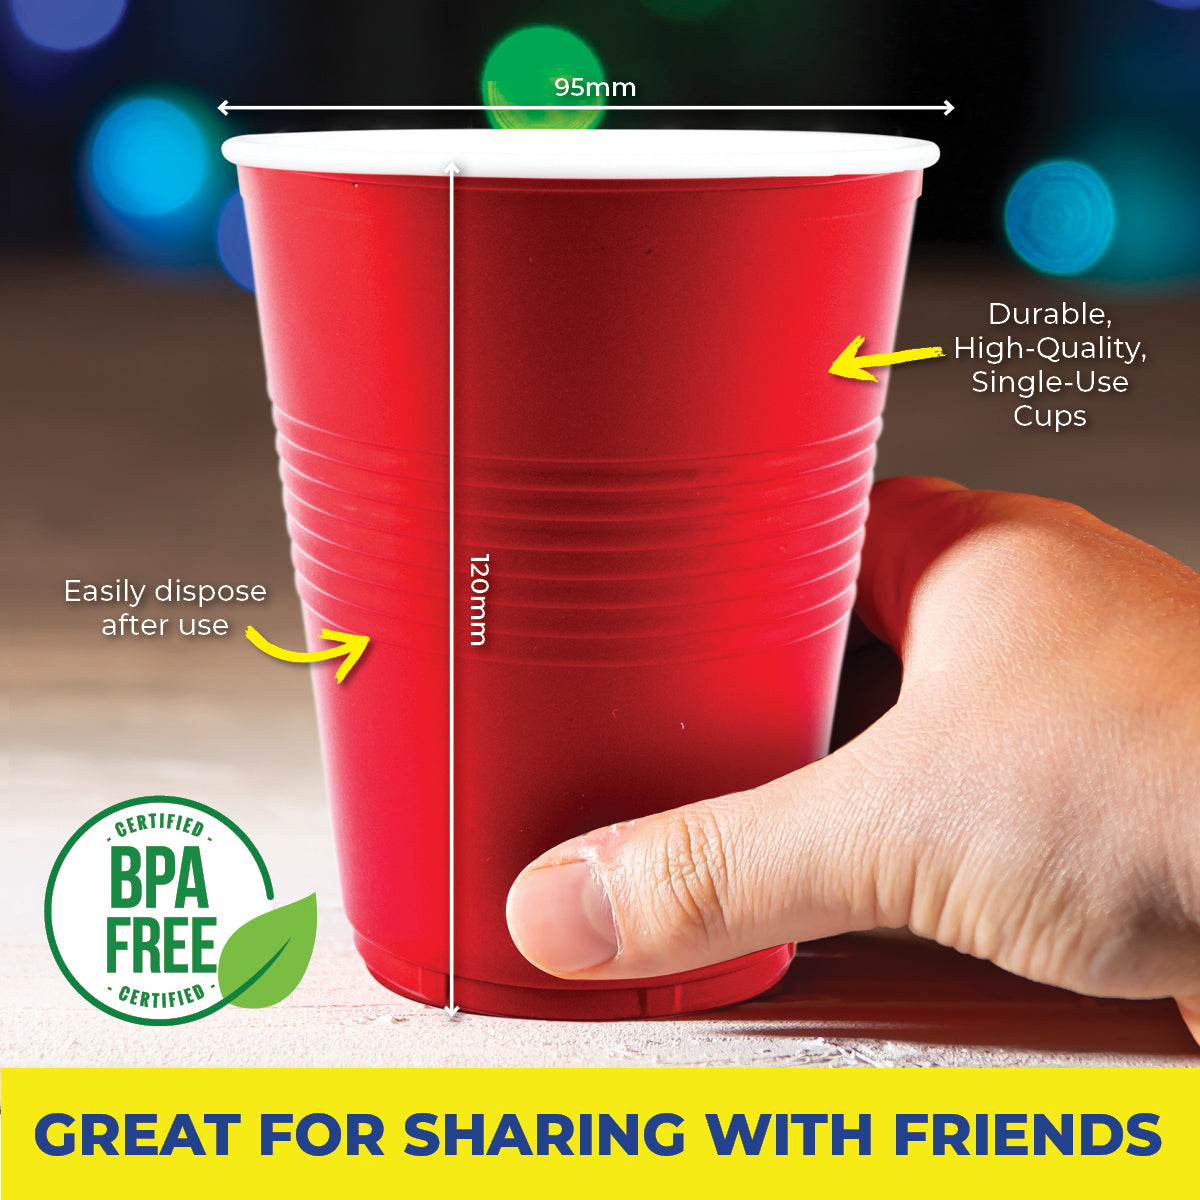 Party Central 480PCE Red Party Cups Disposable Large Rim High Quality 450ml Deals499